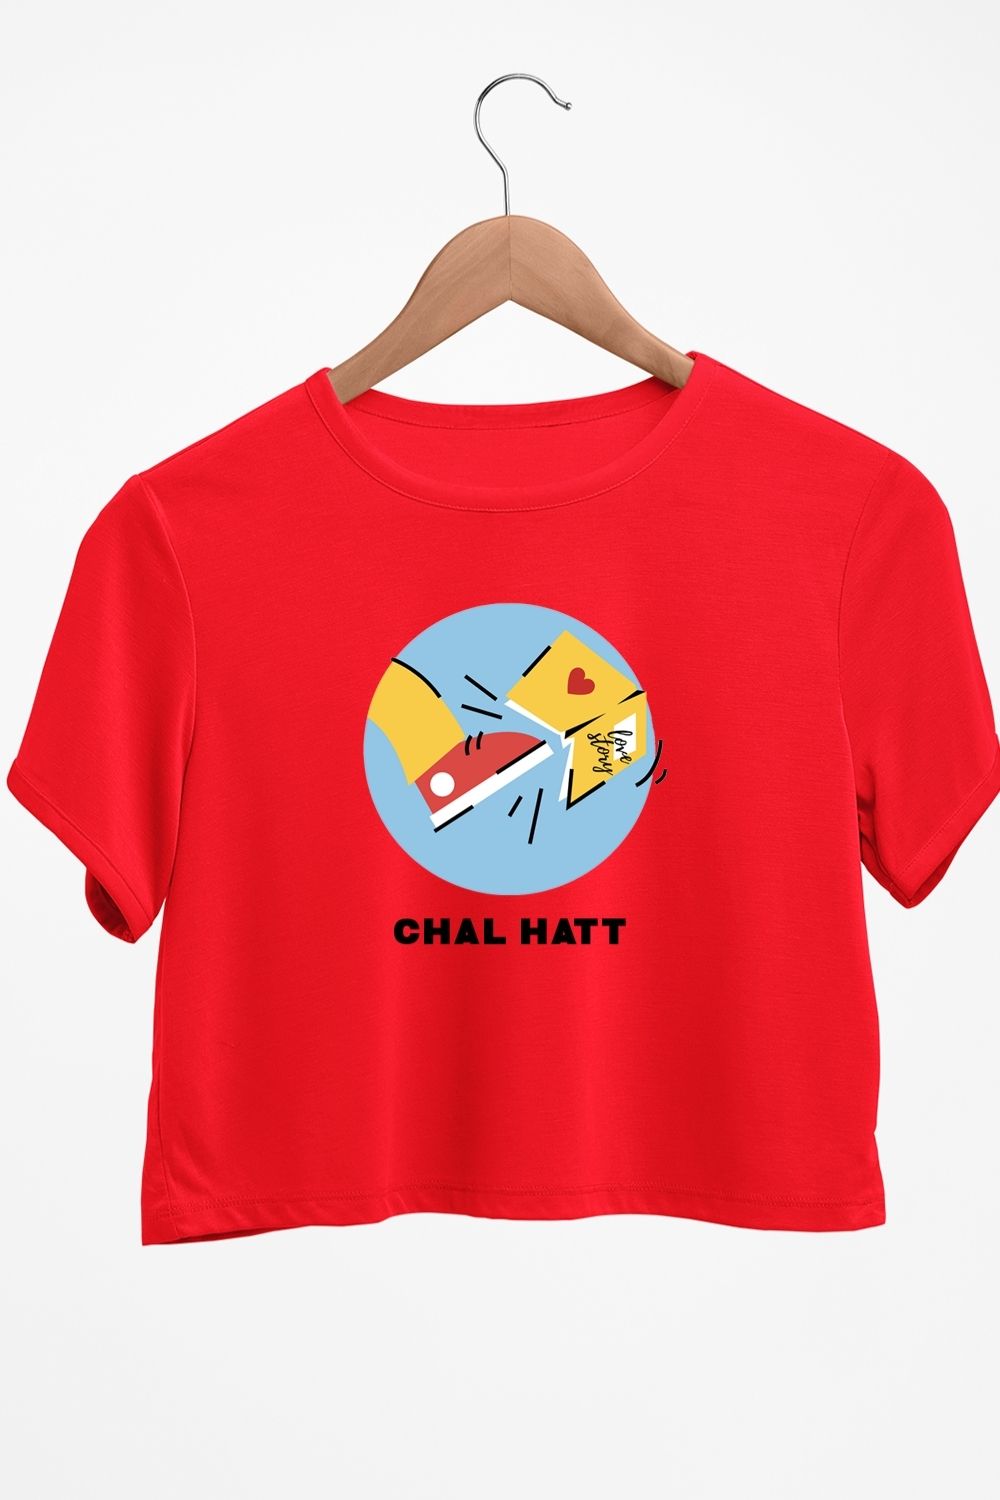 Chal Hatt Graphic Printed Red Crop Top